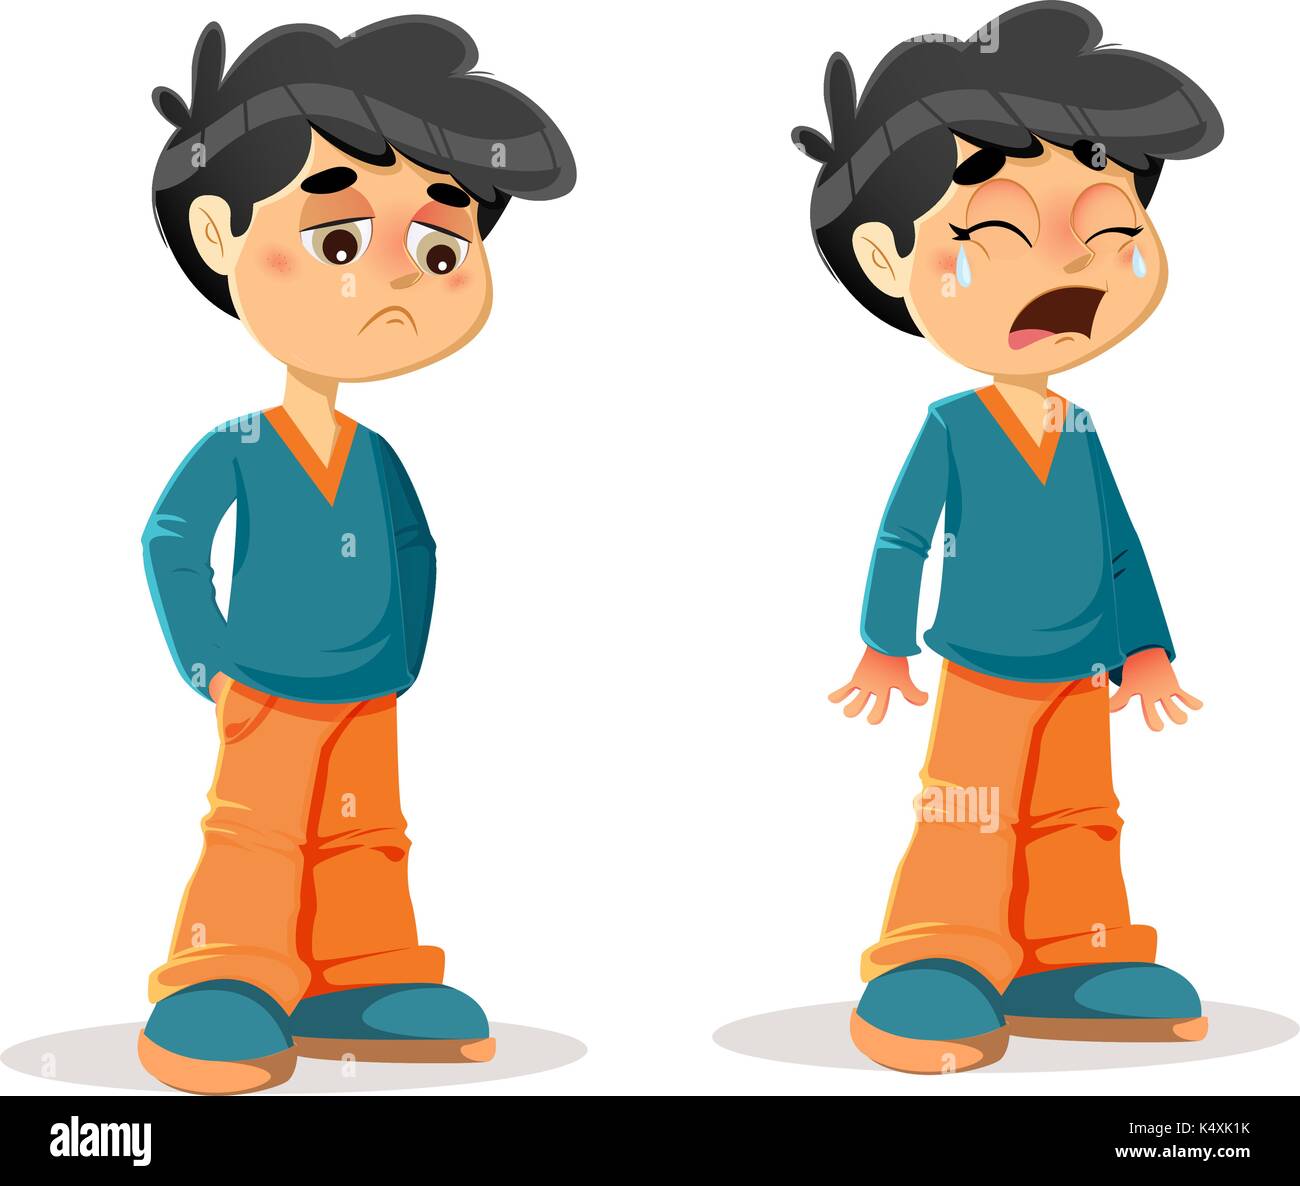 Vector Illustration of Sad Crying Young Boy Body Language and Expressions Stock Vector